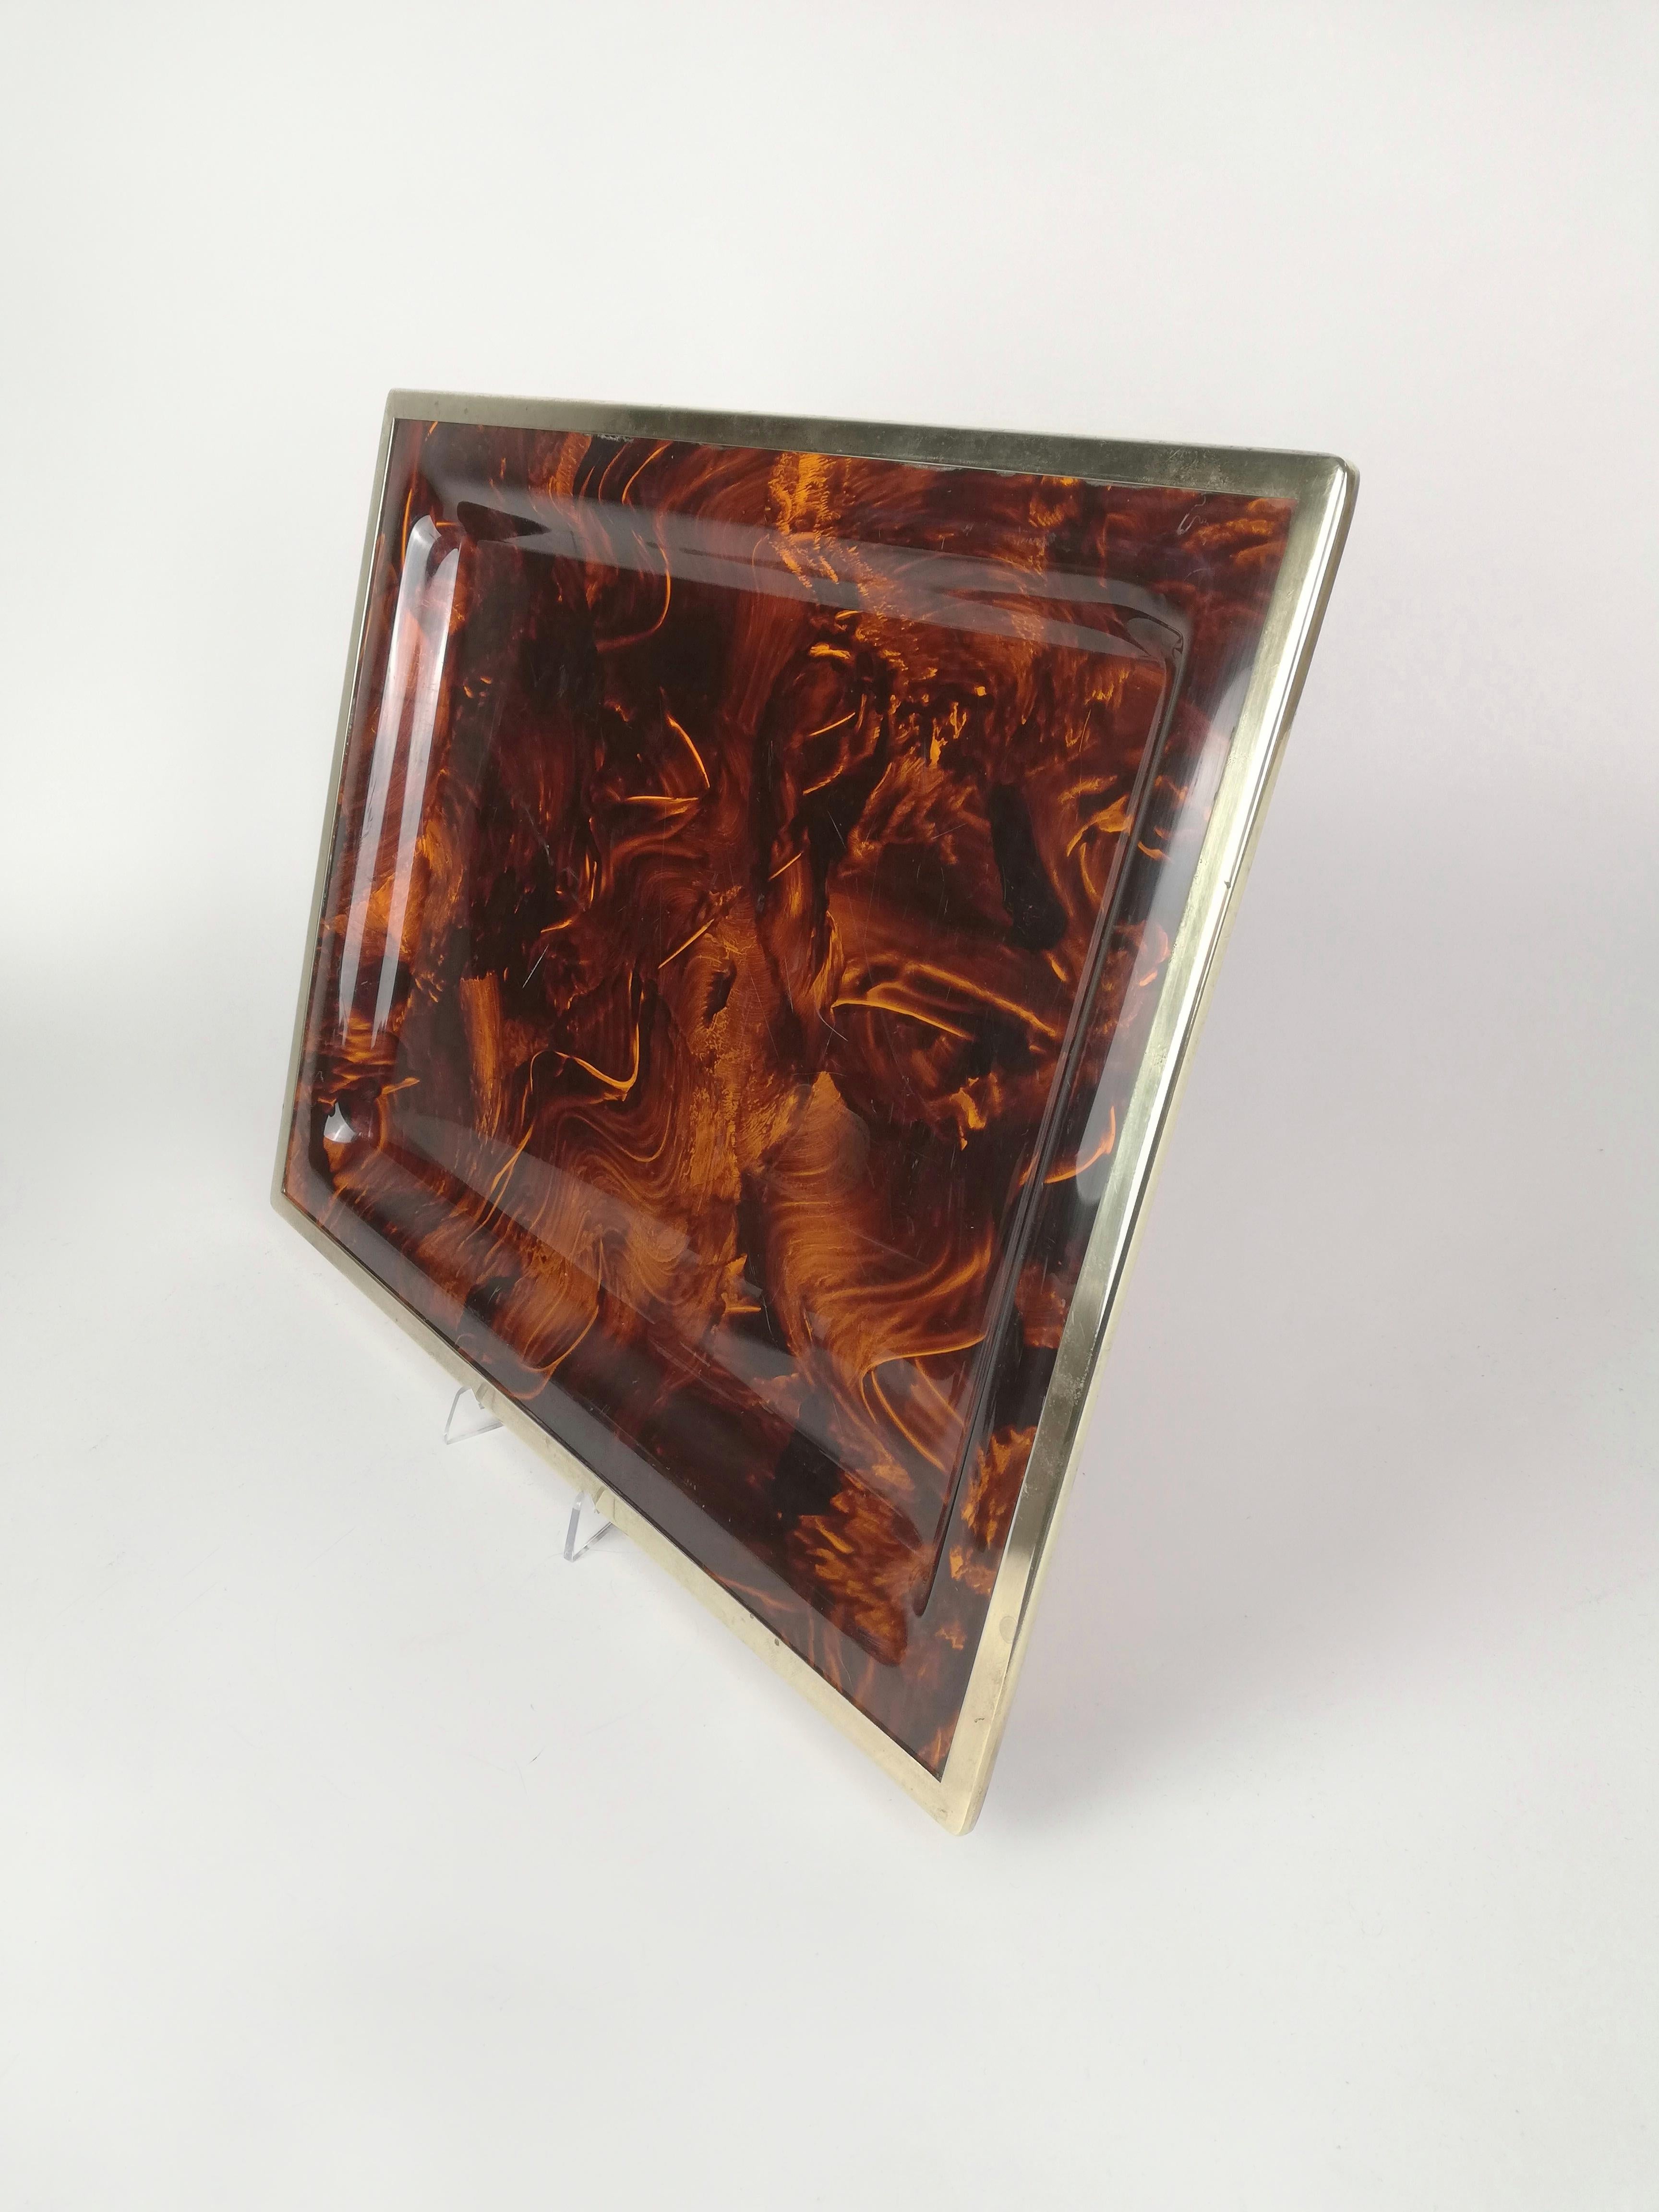 Very big Mid Century Modern Serving tray in the style of Romeo Rega productions.
It was made in Italy in the 1970 circa.
The tray has a rectangular shape made in faux tortoiseshell methacrylate,
embellished with a golden brass frame.
The